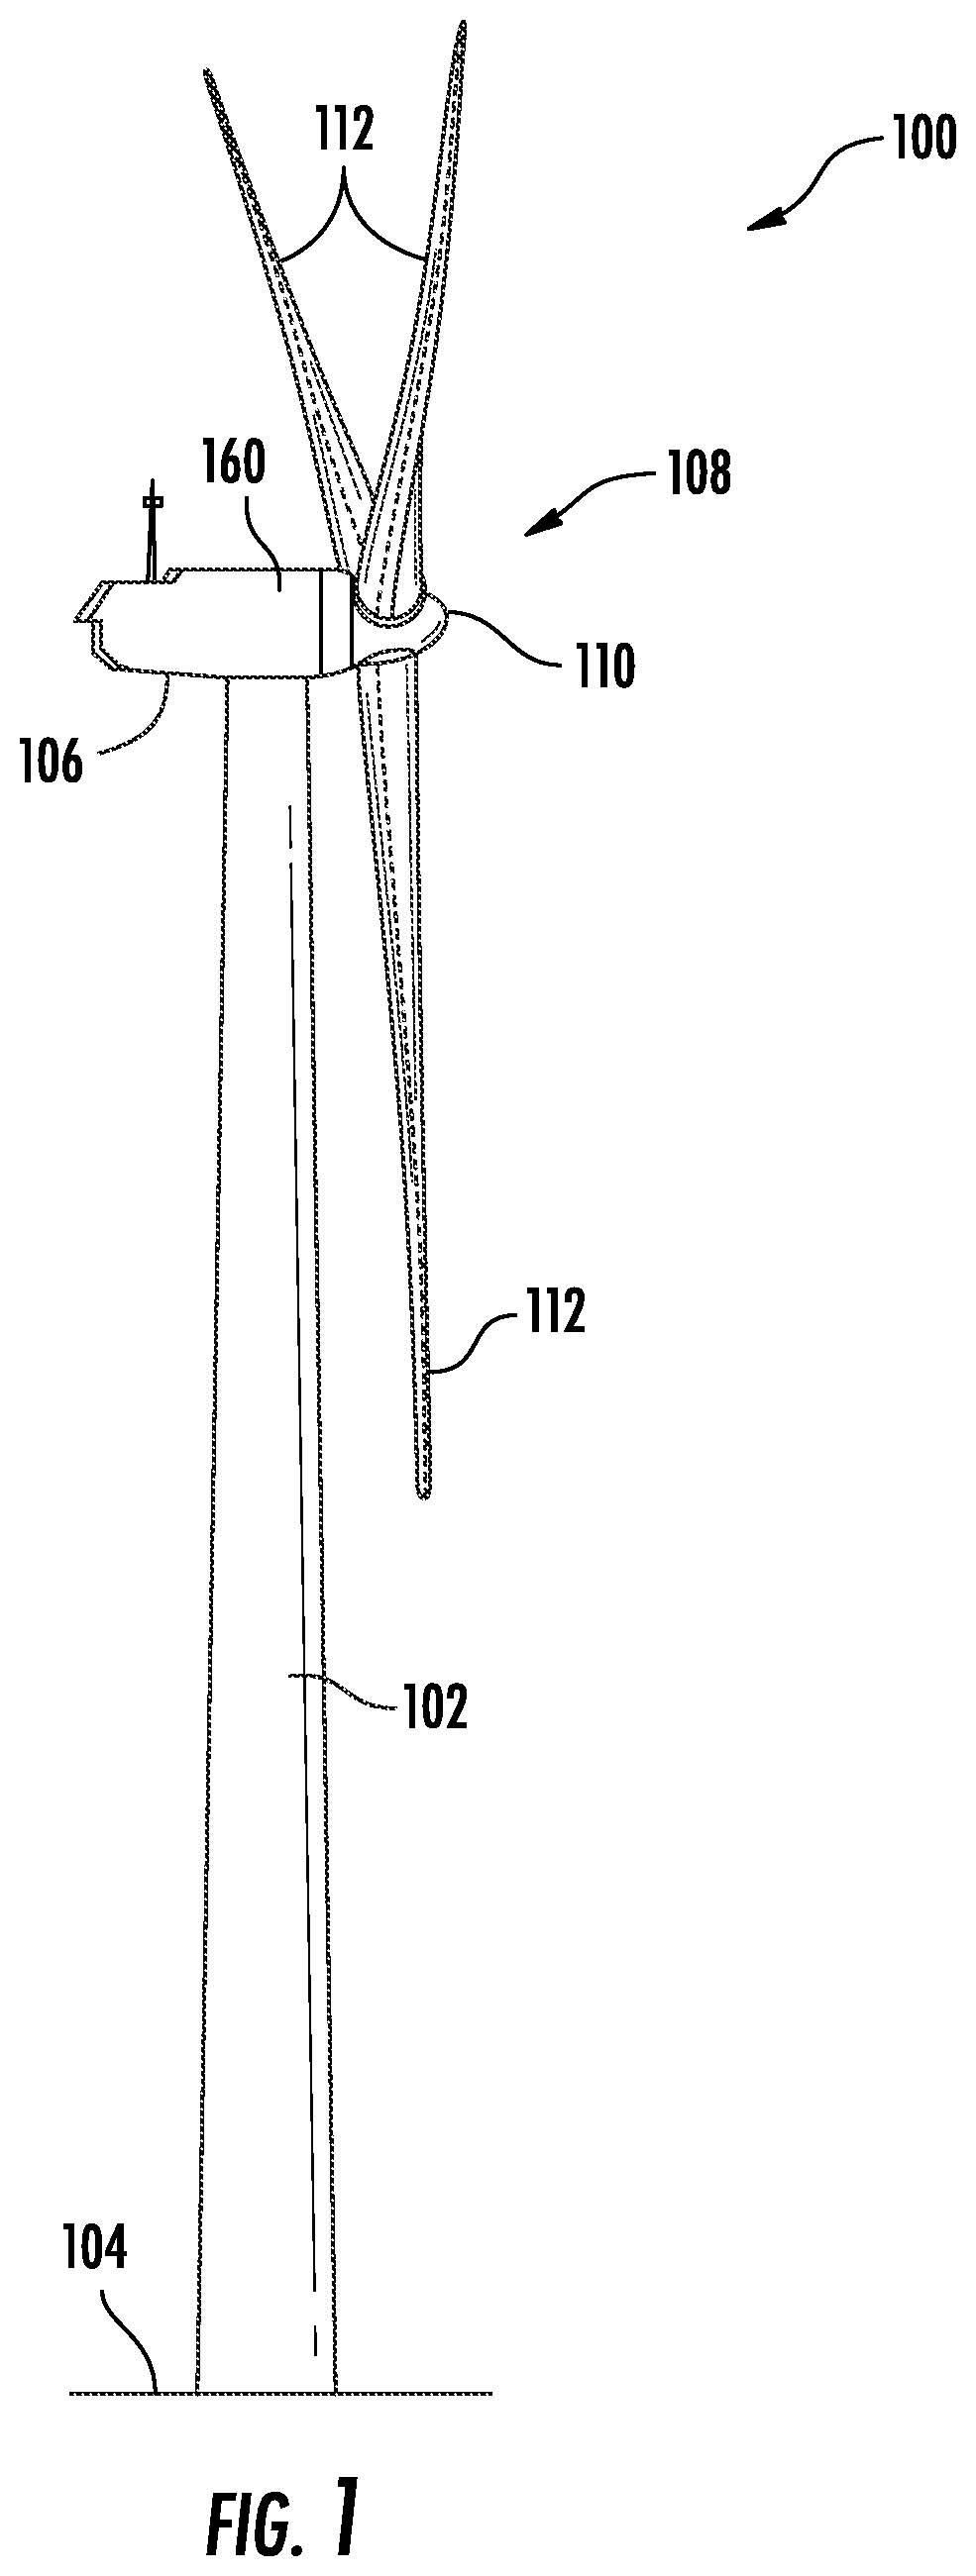 System and method for coupling a hub to a main shaft of a wind turbine